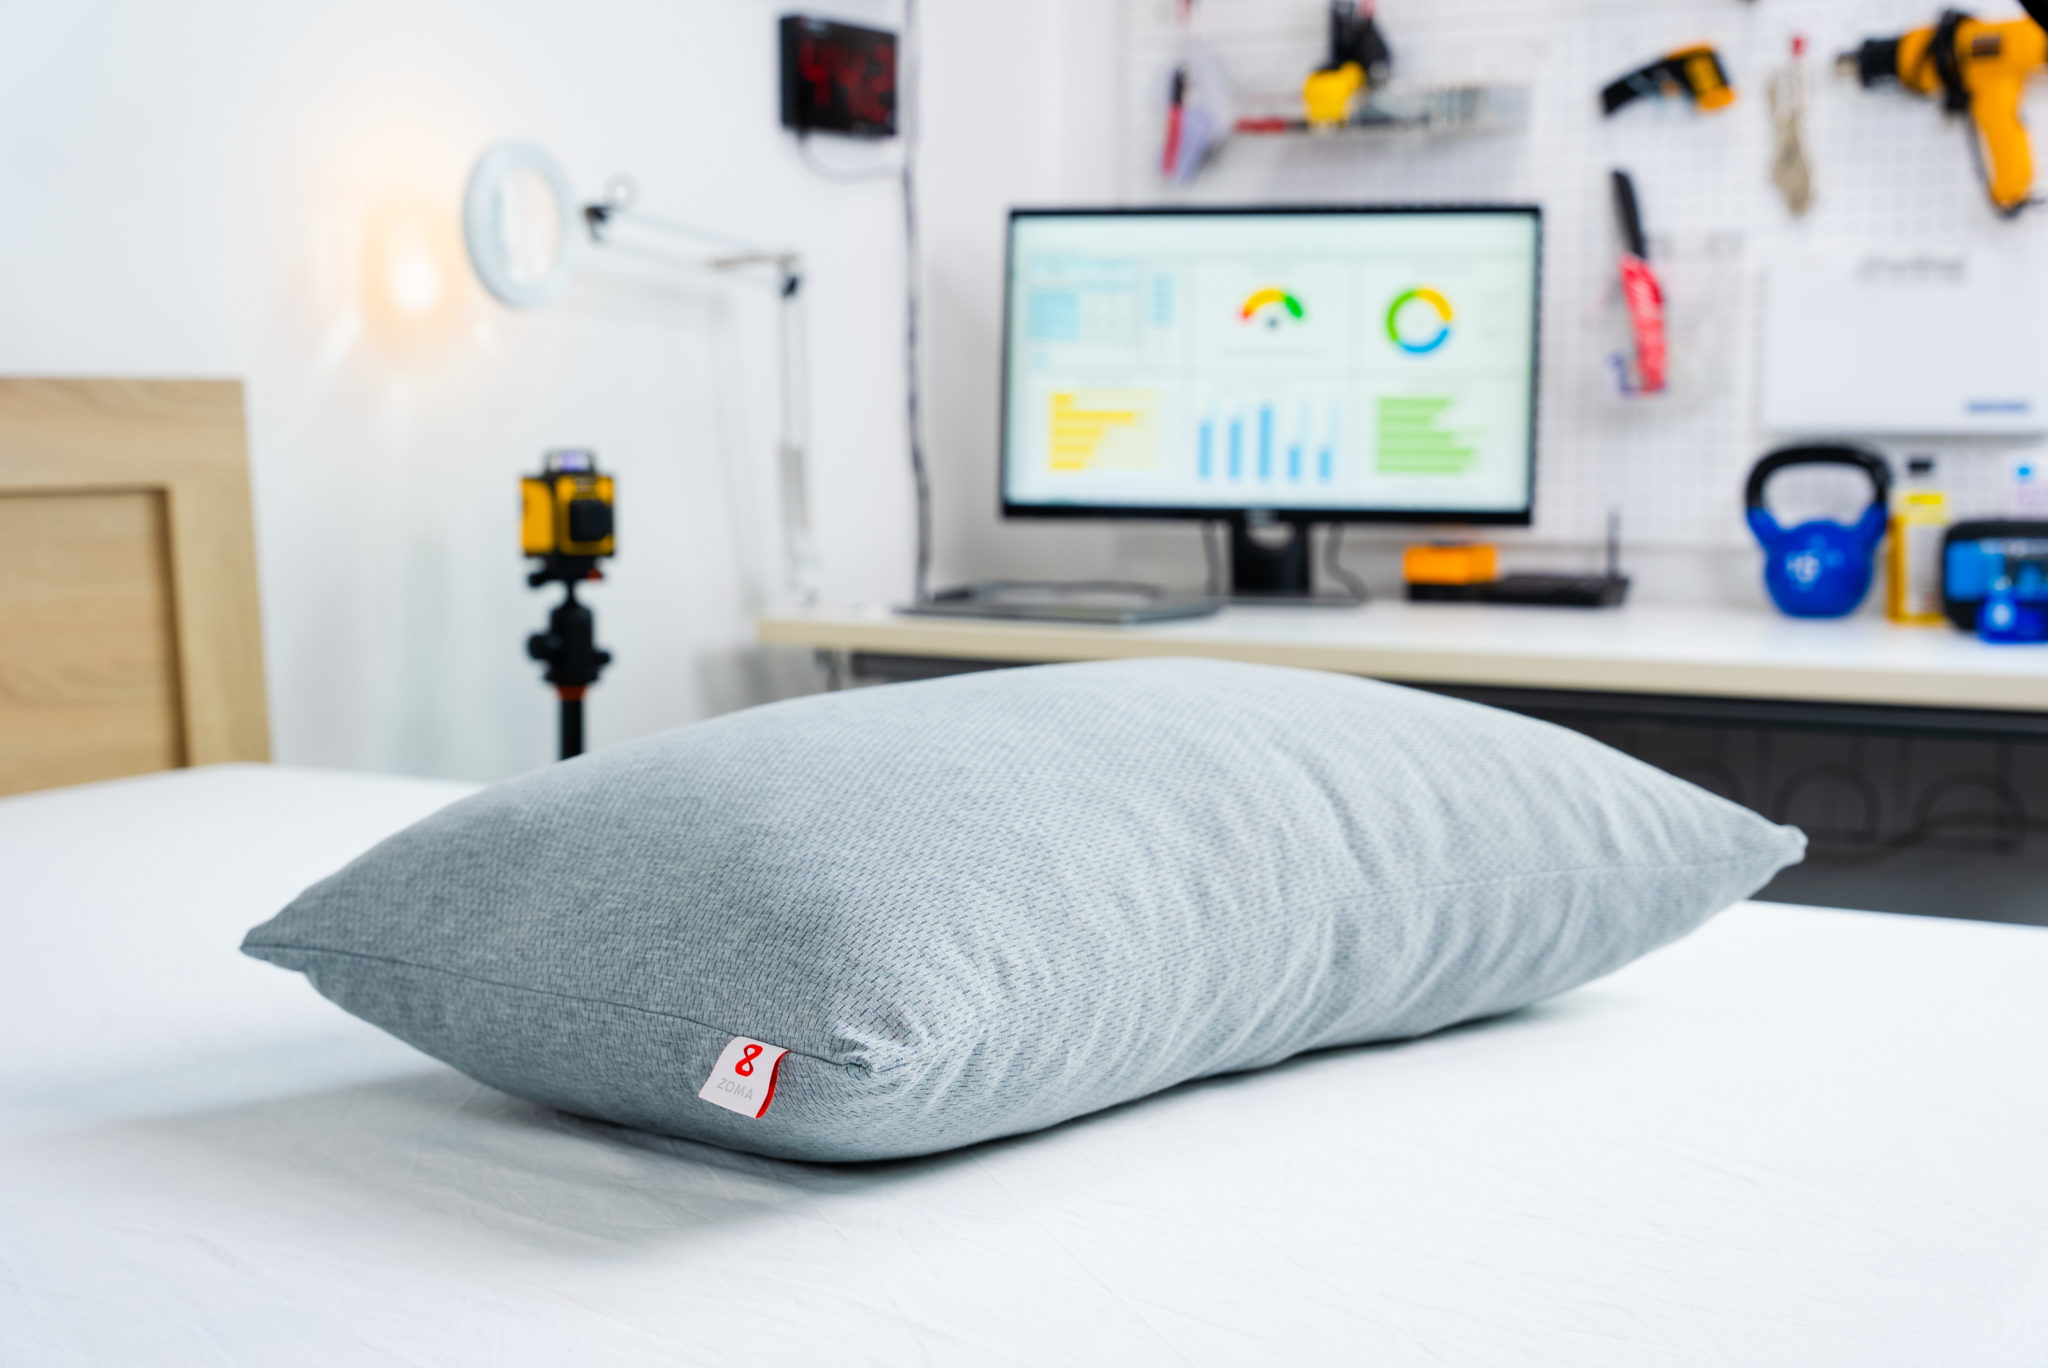 The Best Cooling Pillows of 2021 Pillows That Stay Cold For Hot Sleepers